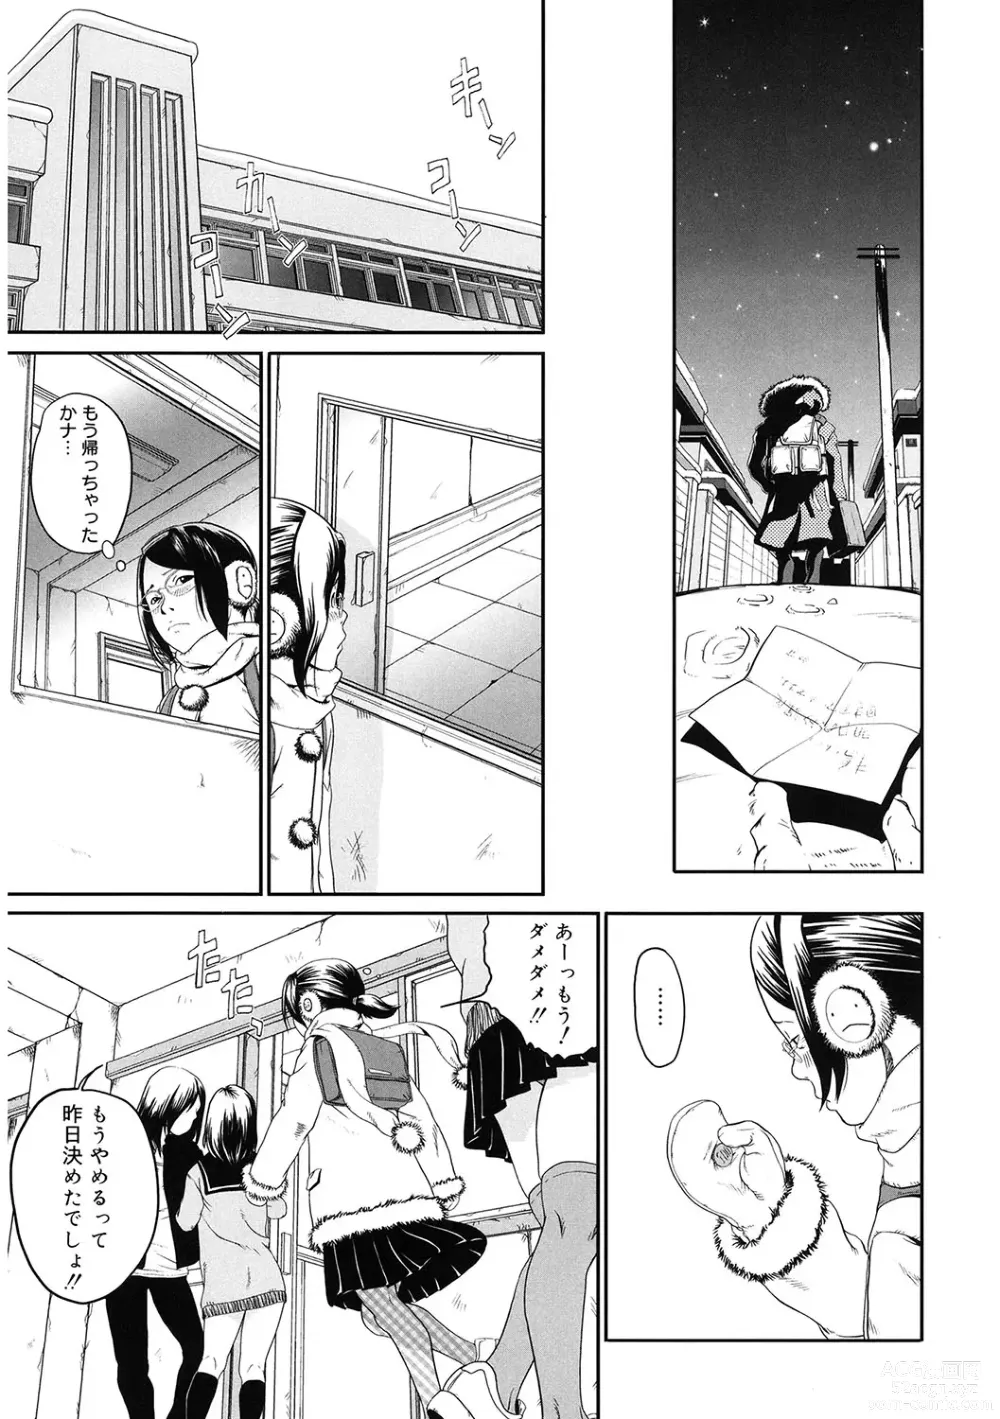 Page 174 of manga LQ -Little Queen- Vol. 54